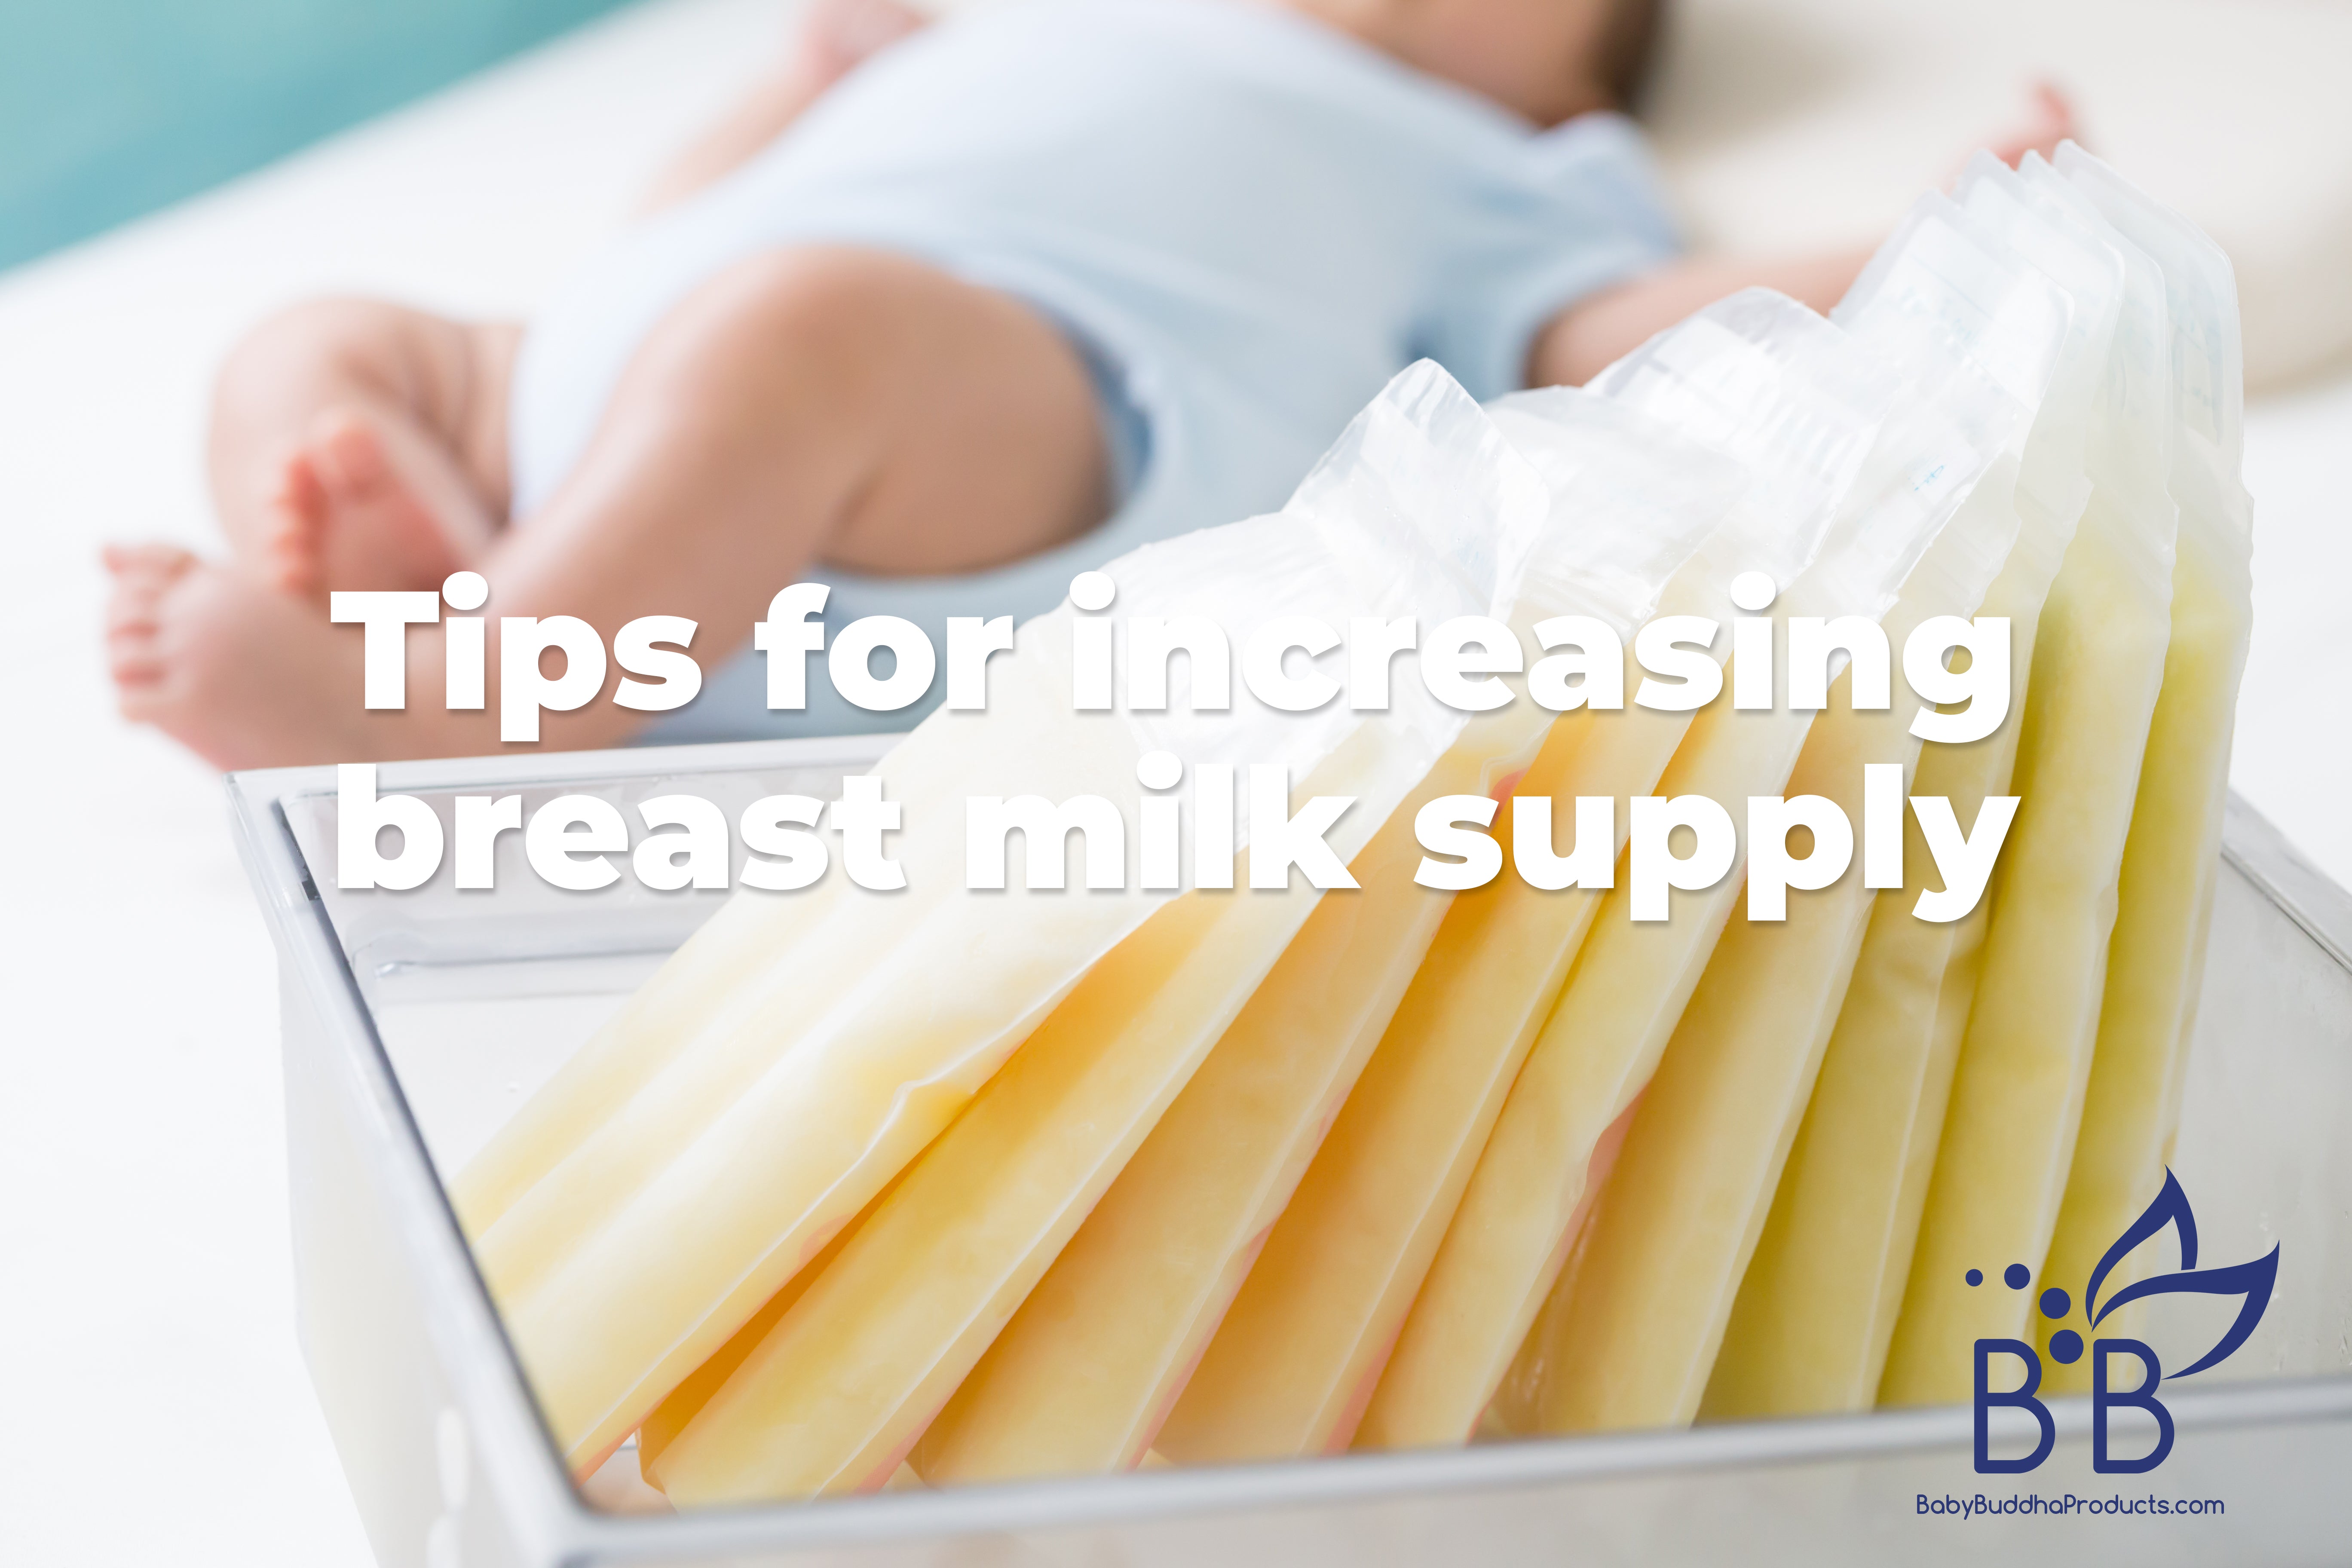 A Complete Guide on How To Increase Breast Milk Supply